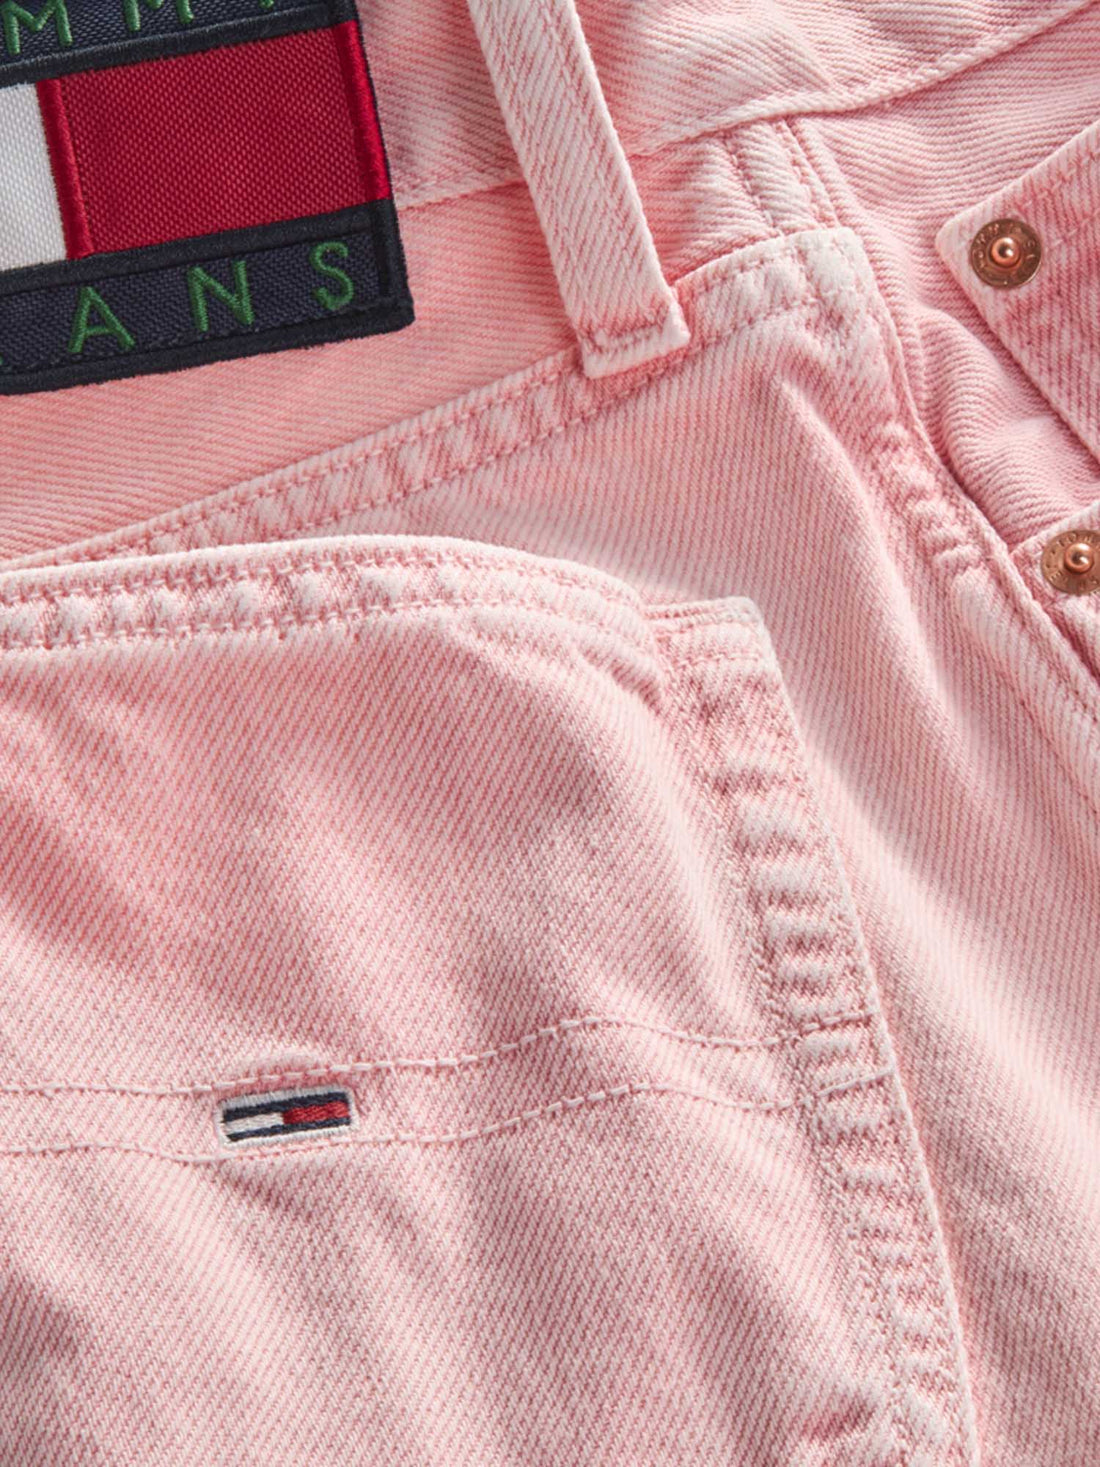 Bermuda Rosa Tommy Jeans